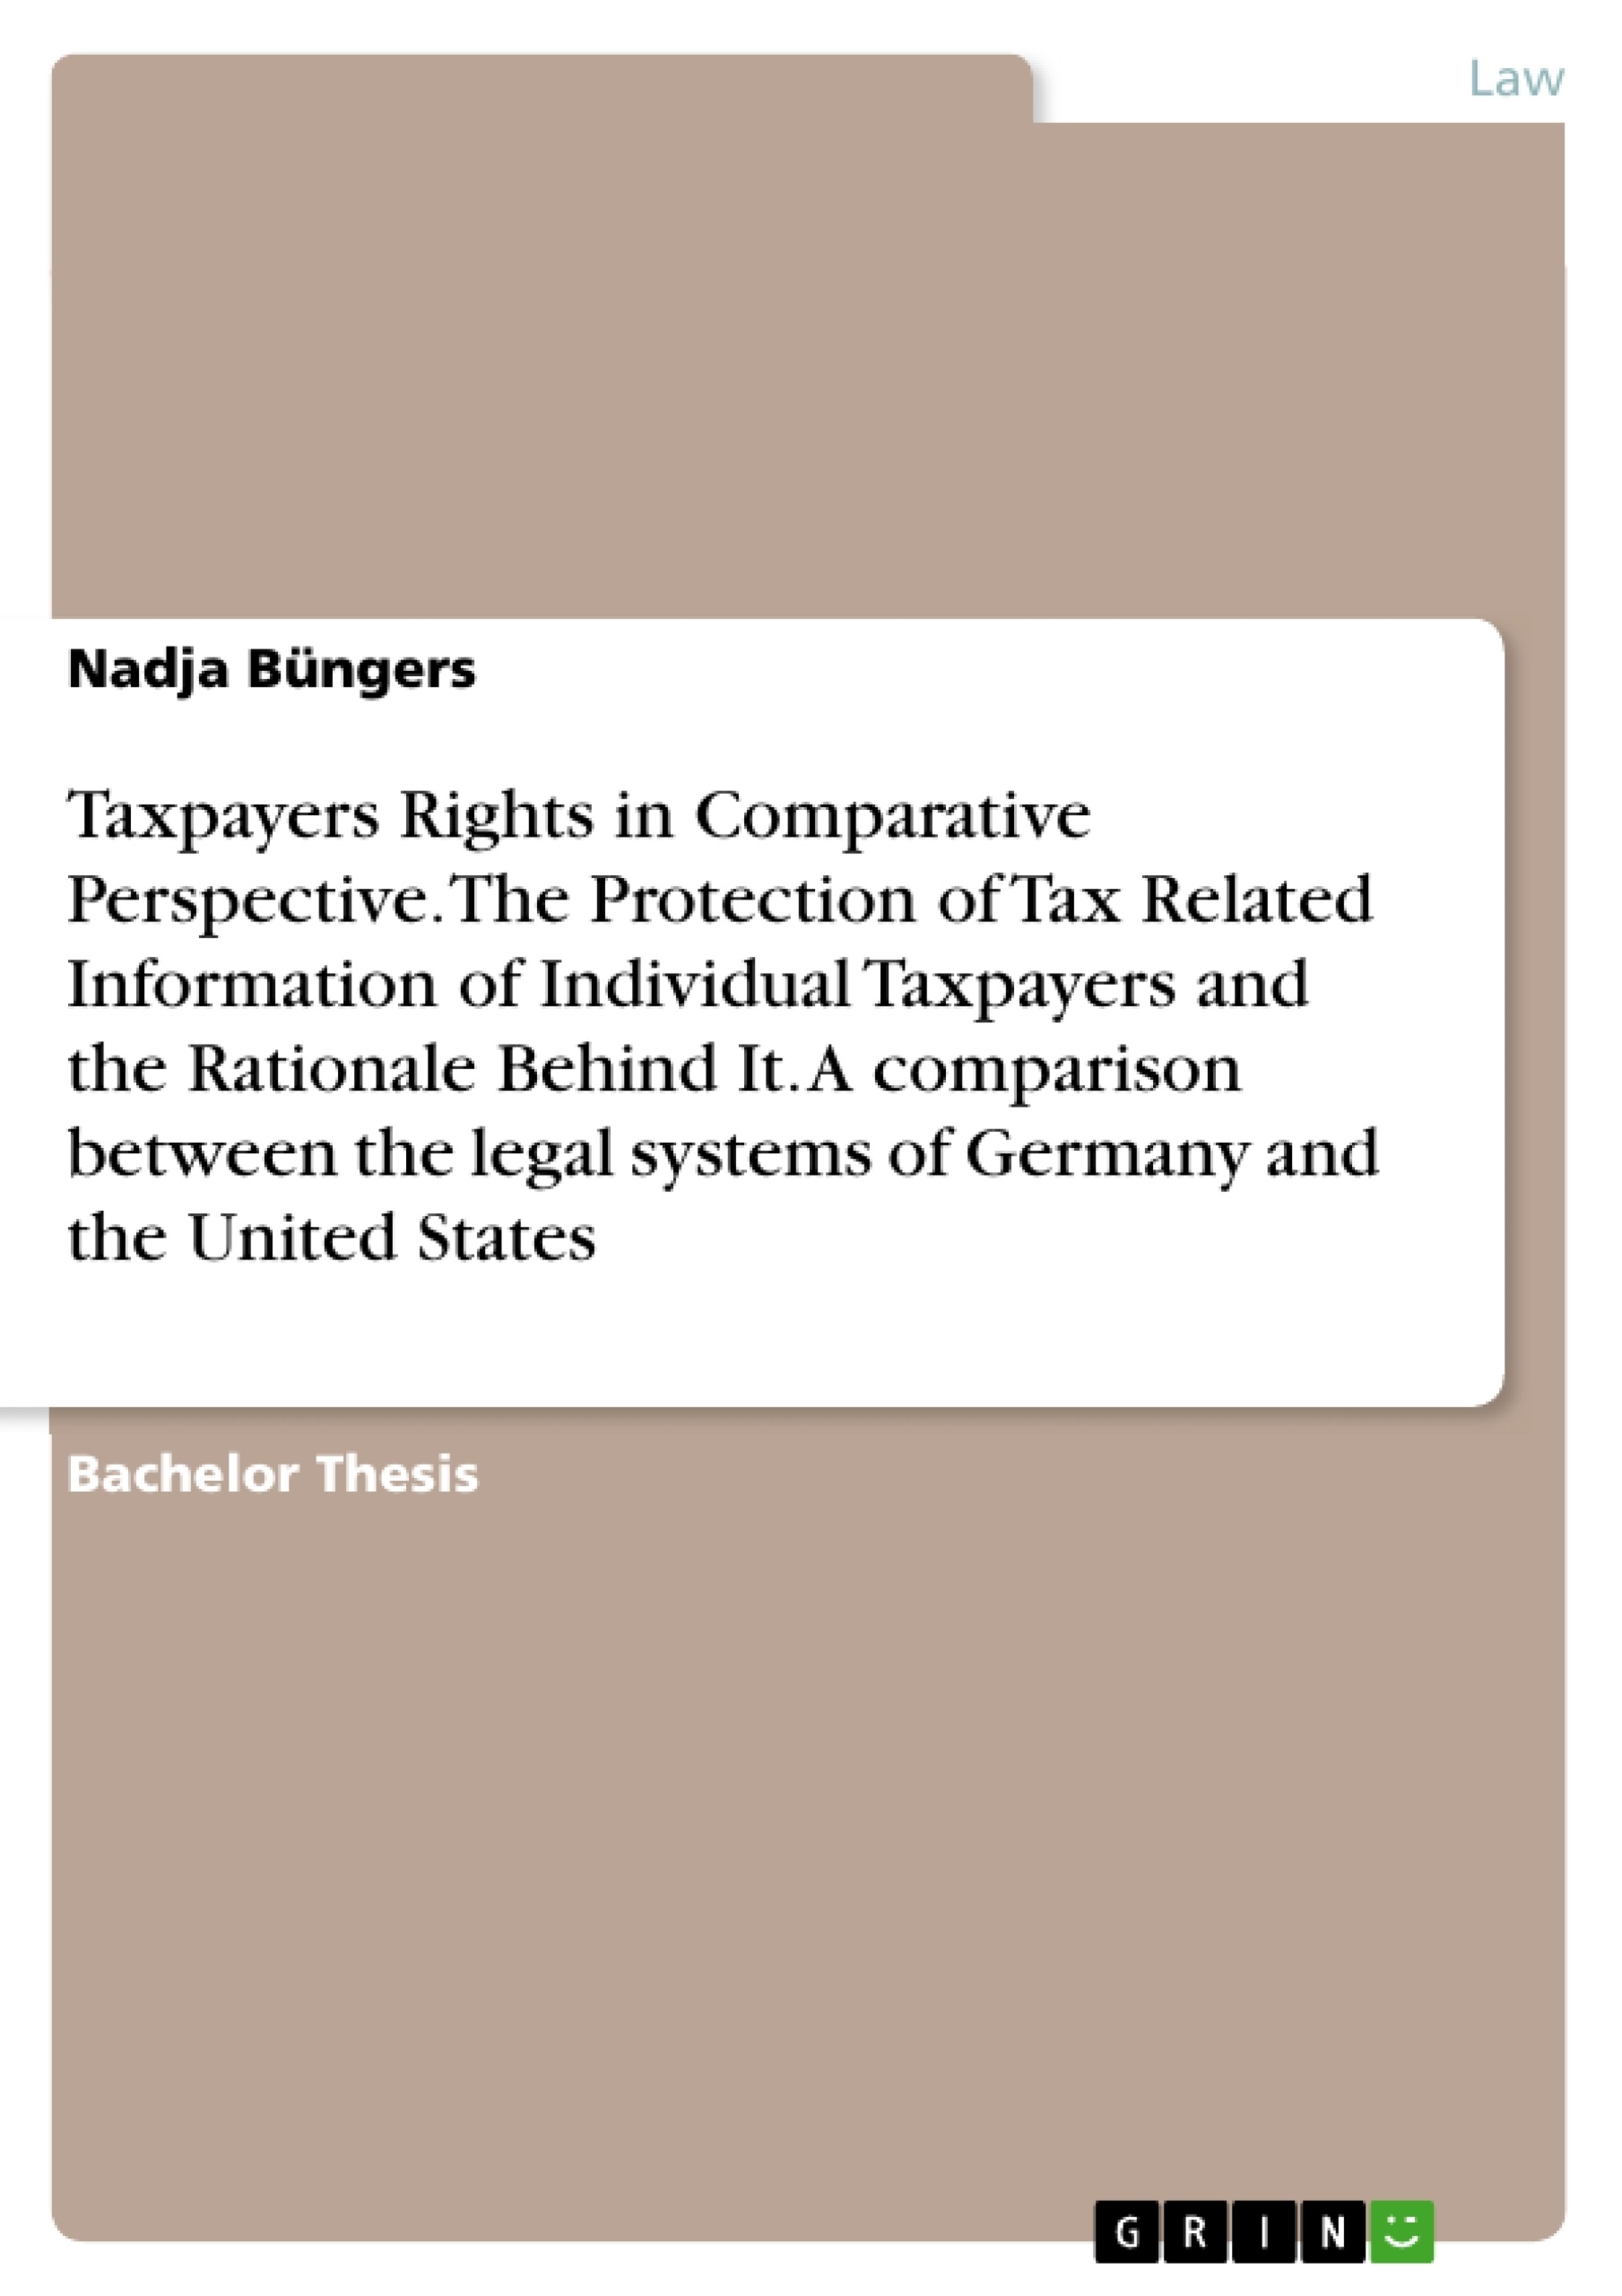 Title: Taxpayers Rights in Comparative Perspective. The Protection of Tax Related Information of Individual Taxpayers and the Rationale Behind It. A comparison between the legal systems of Germany and the United States